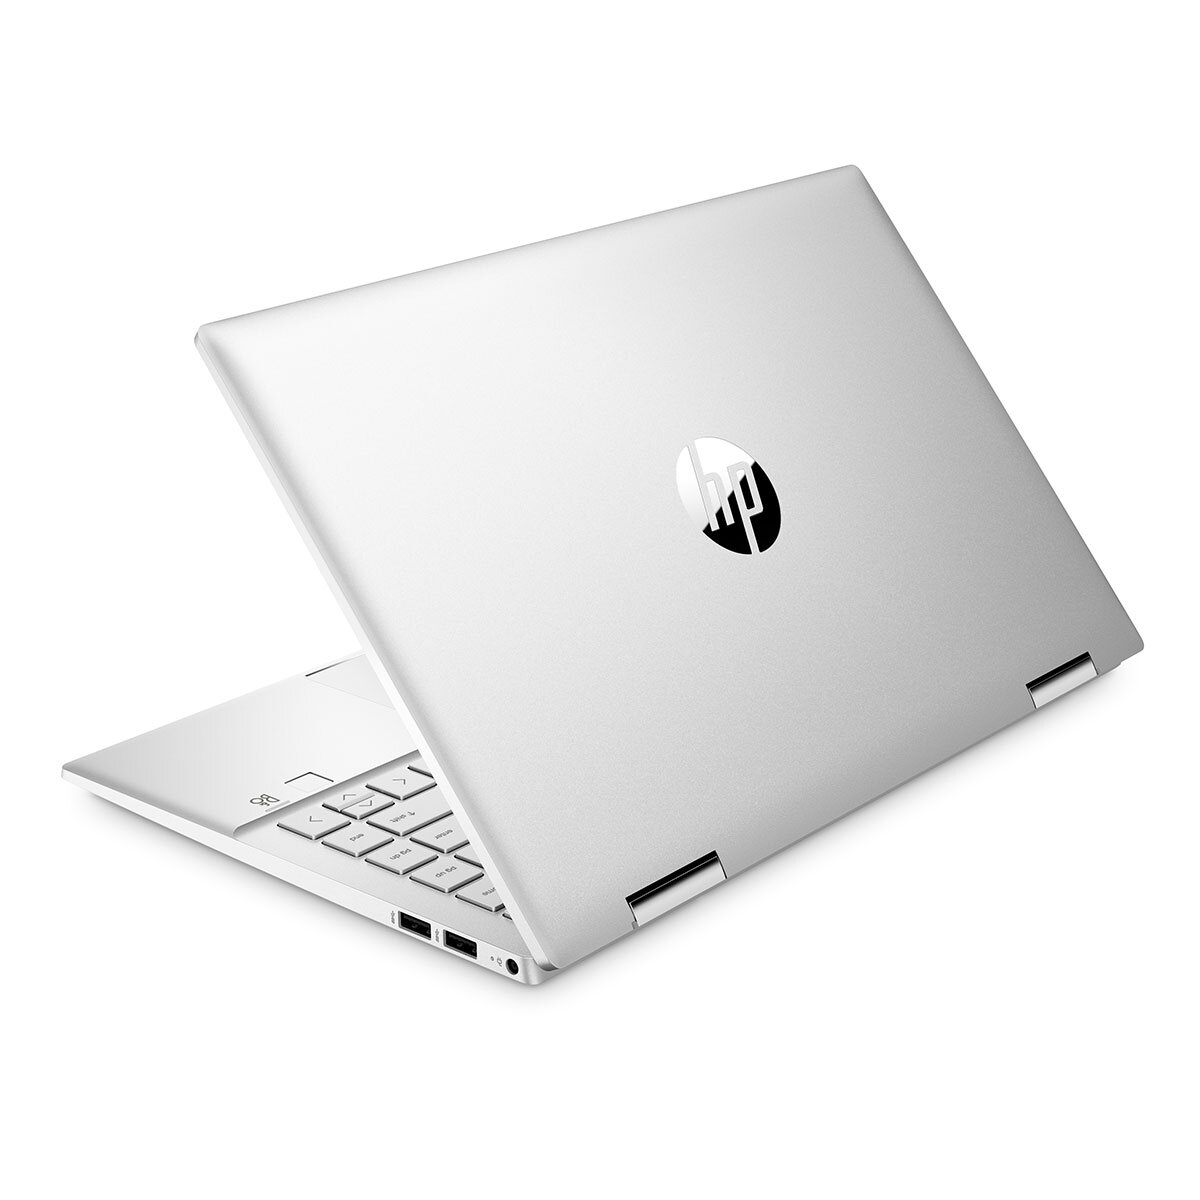 Buy HP Pavilion x360, Intel Core i3, 8GB RAM, 128GB SSD, 14 Inch Convertible Laptop, 14-dy0032na at Costco.co.uk